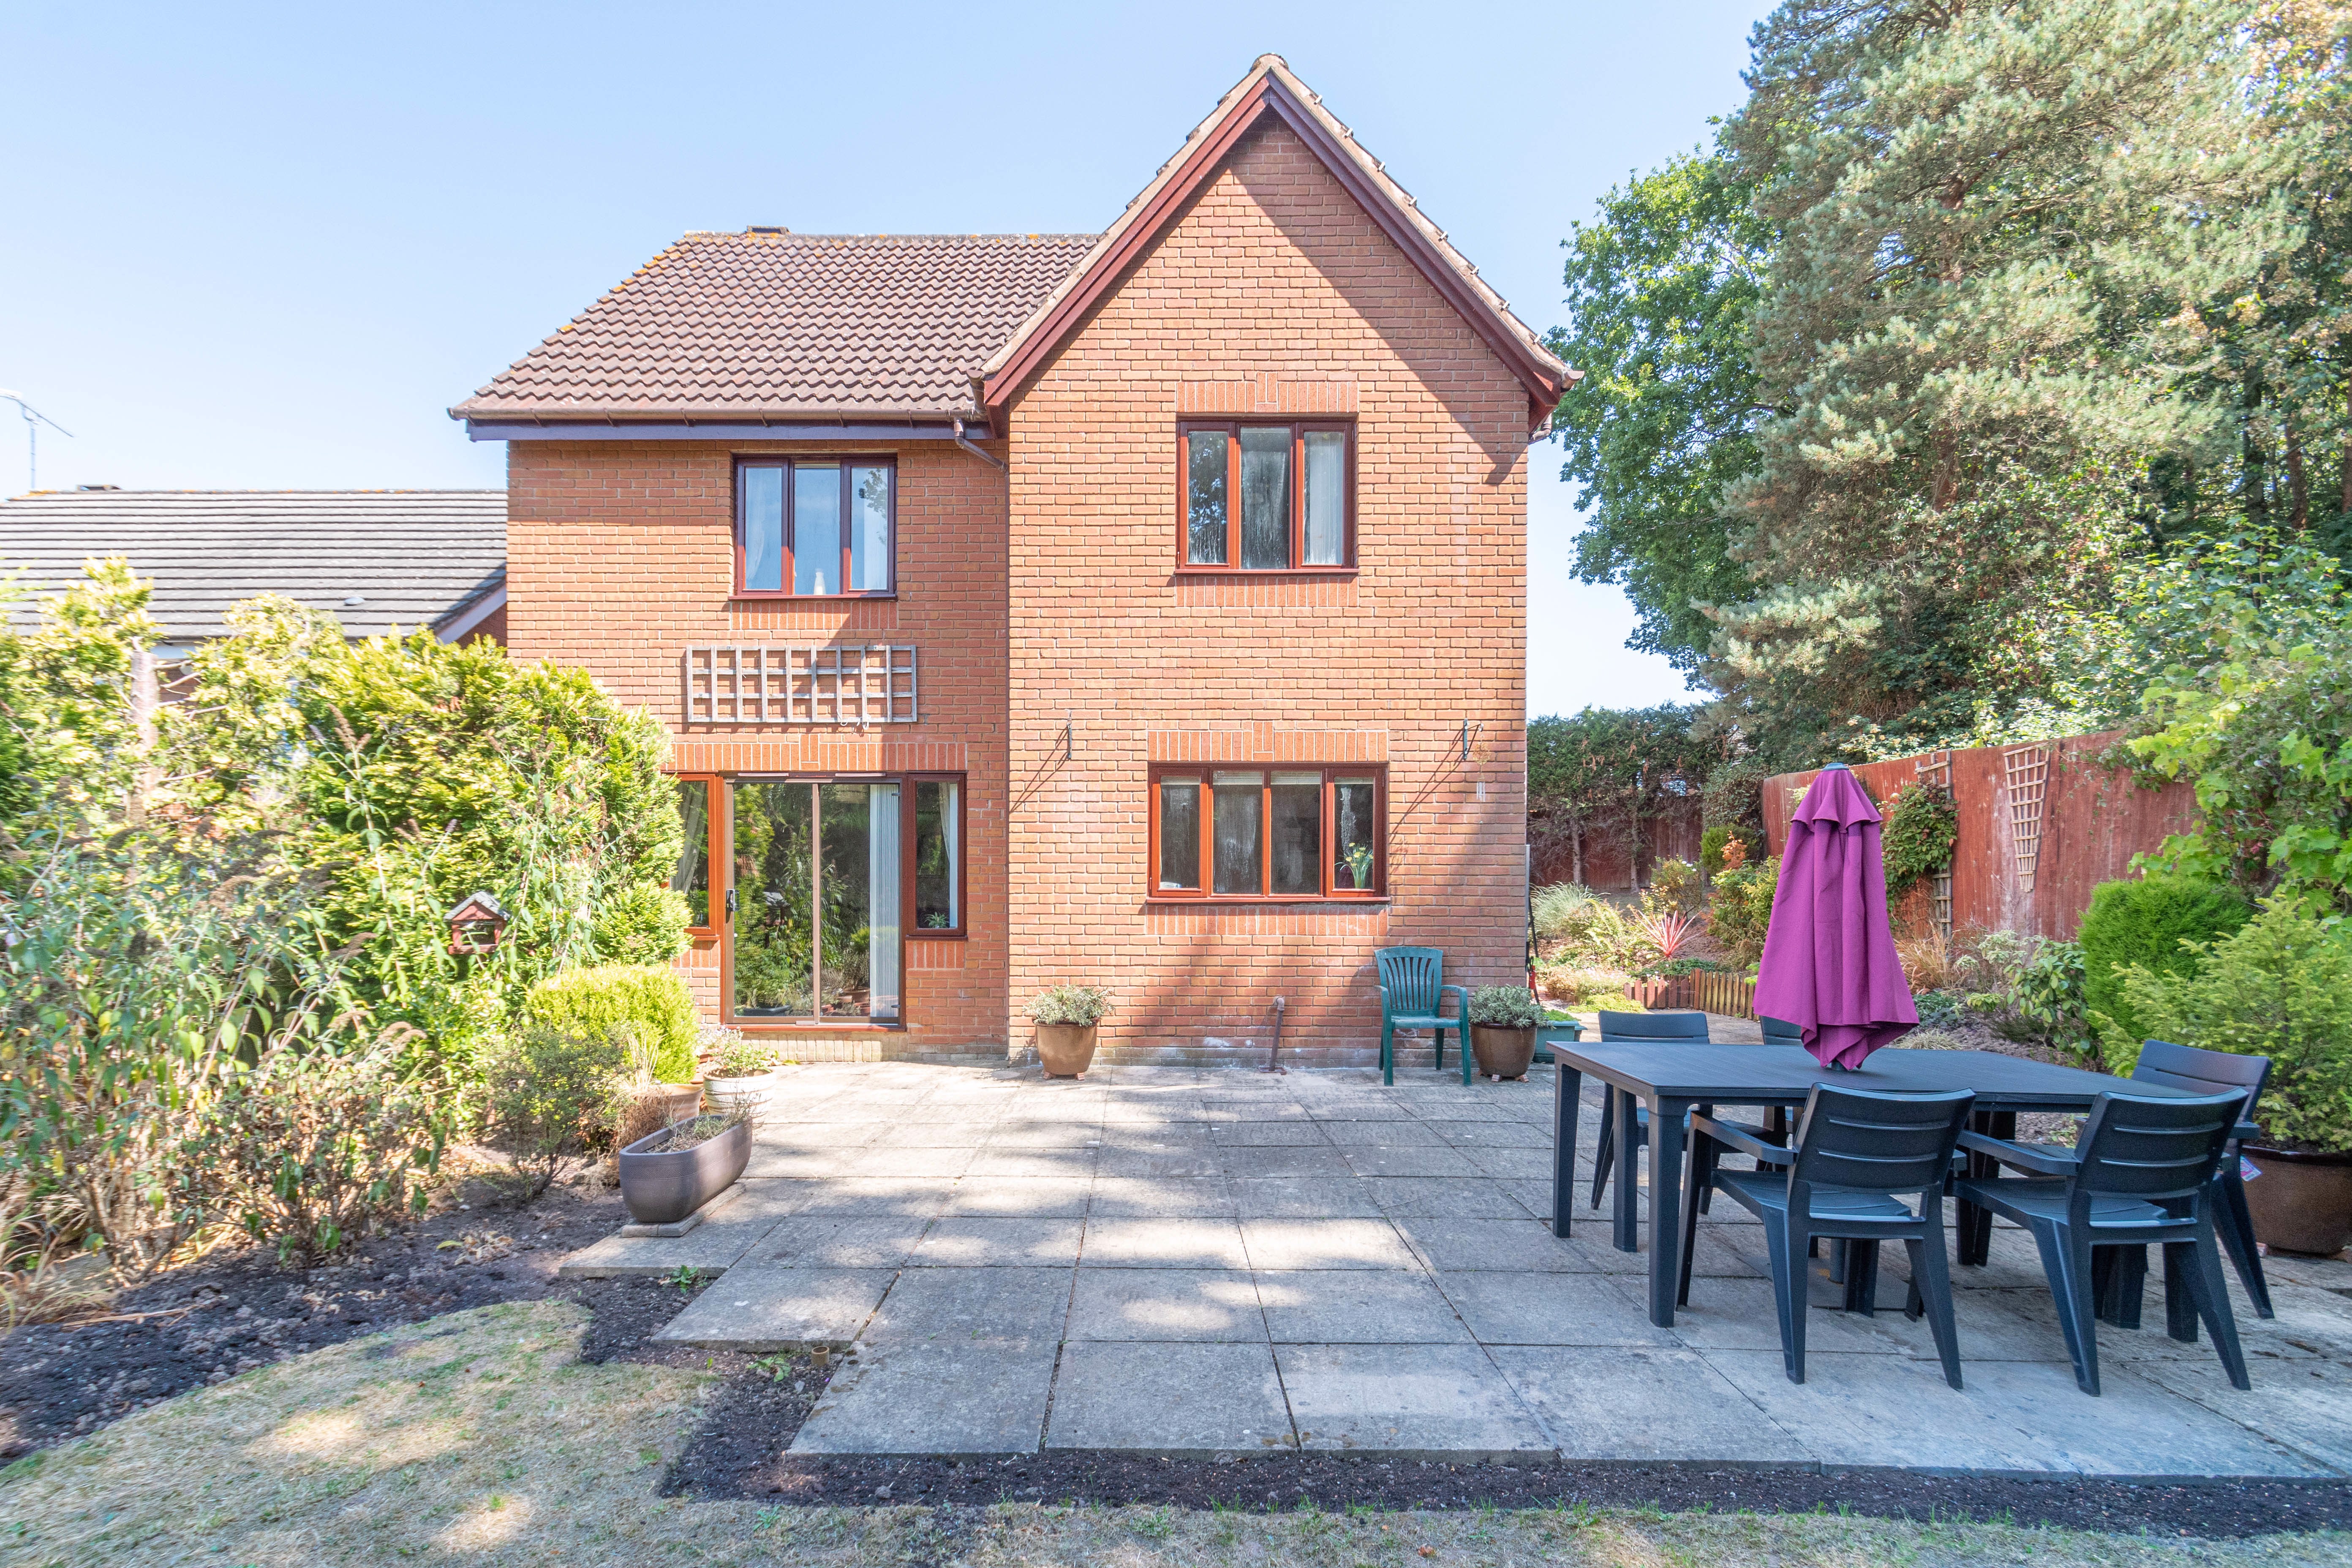 4 bed house for sale in Foxholes Lane, Callow Hill  - Property Image 1